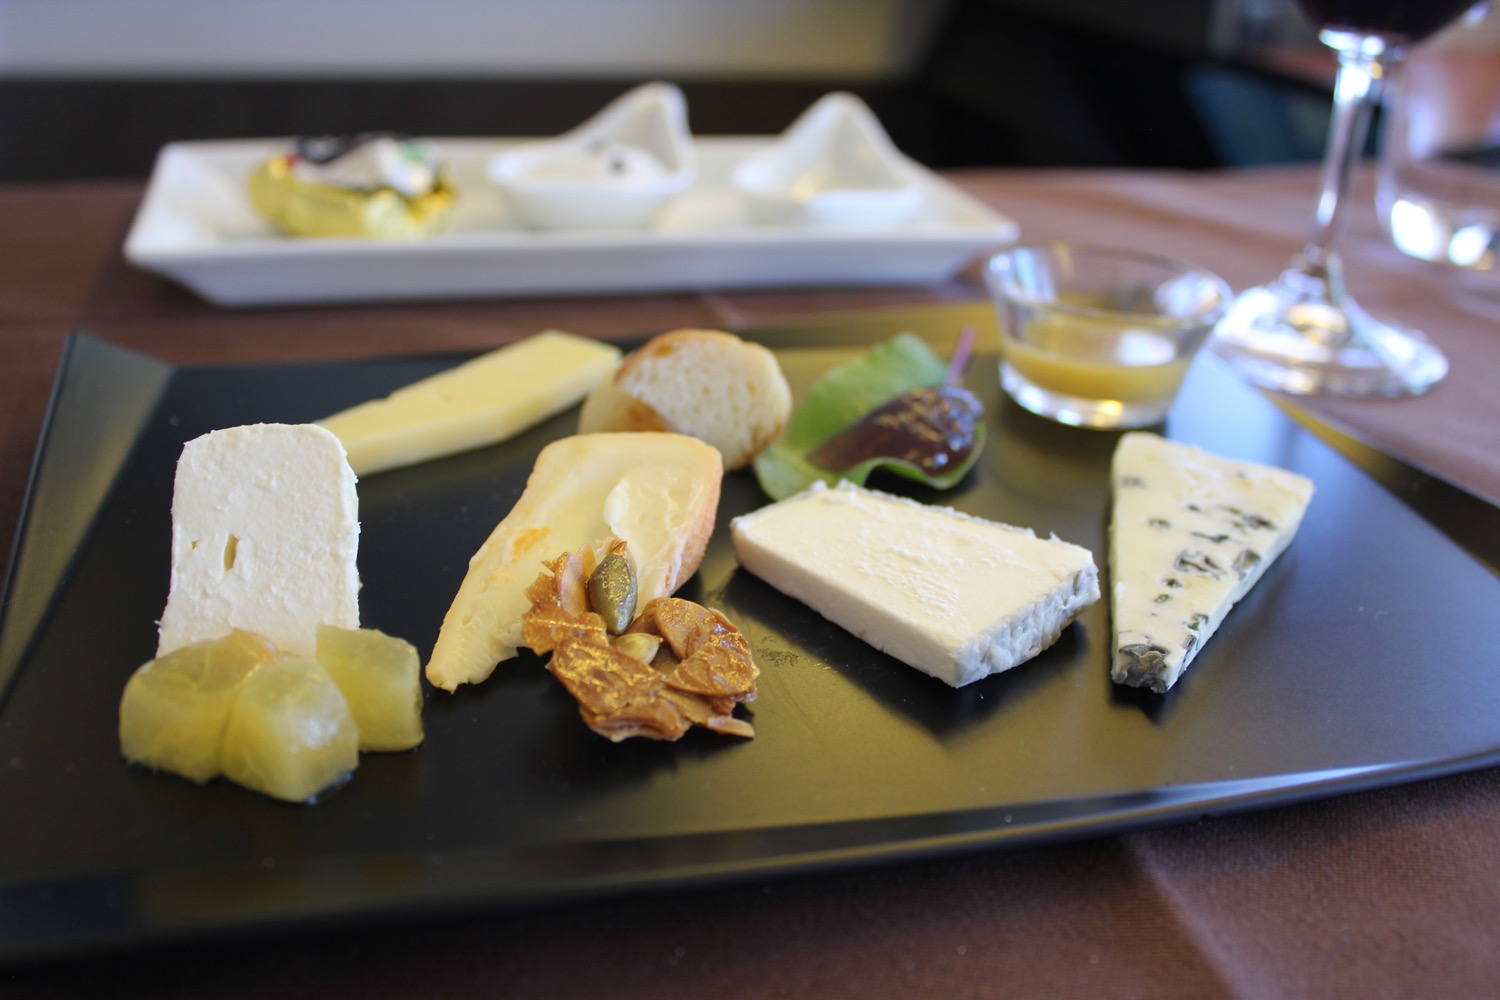 a plate of cheese and other food